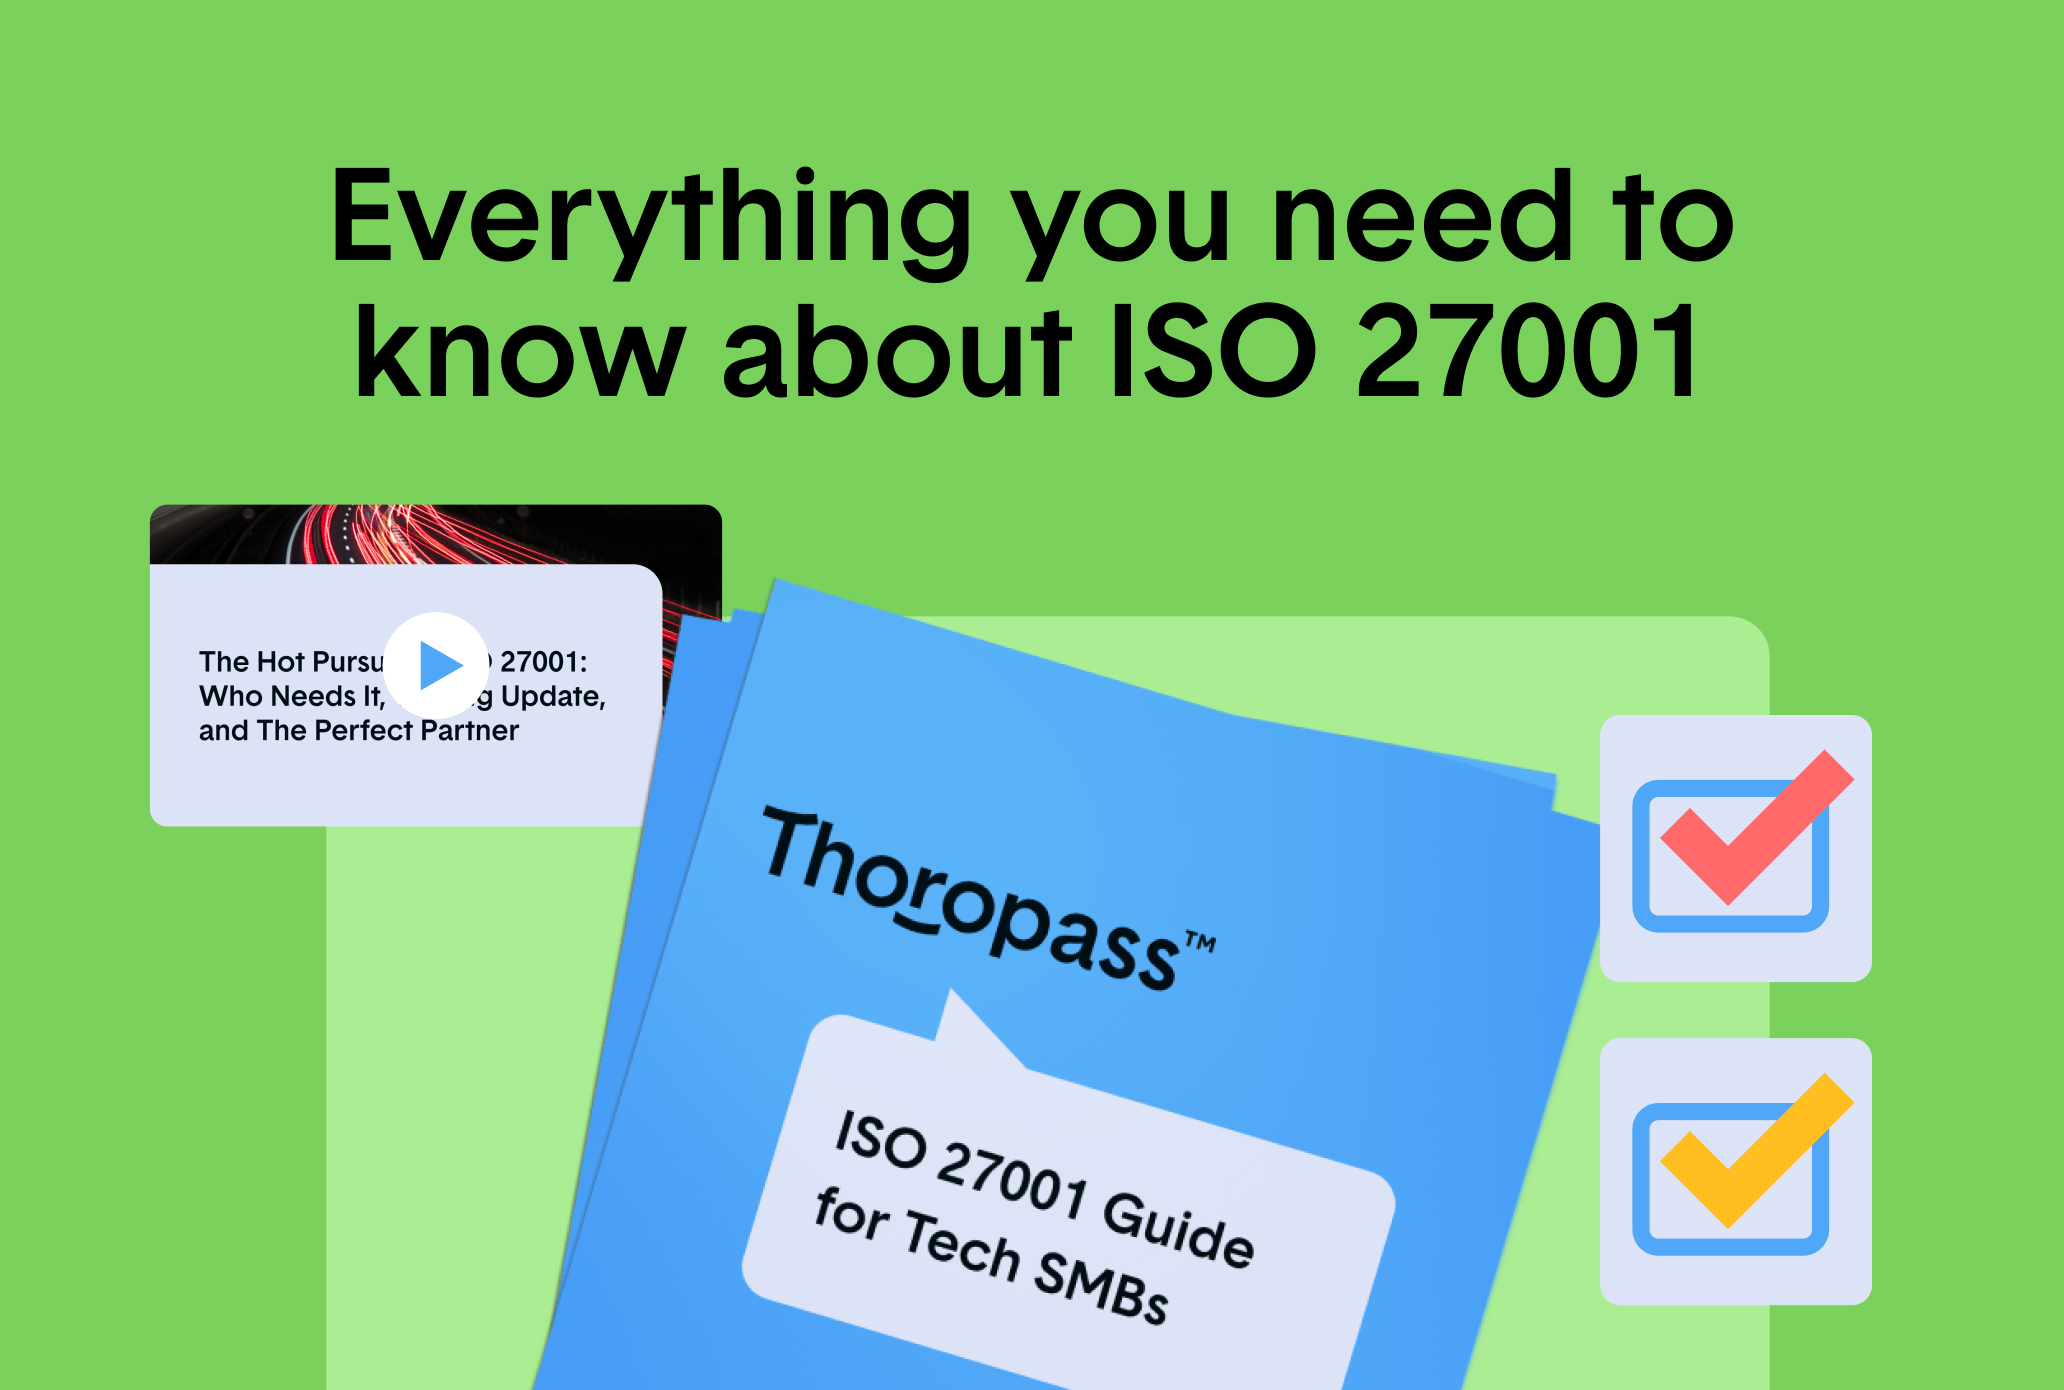 Everything you need to know about ISO 27001